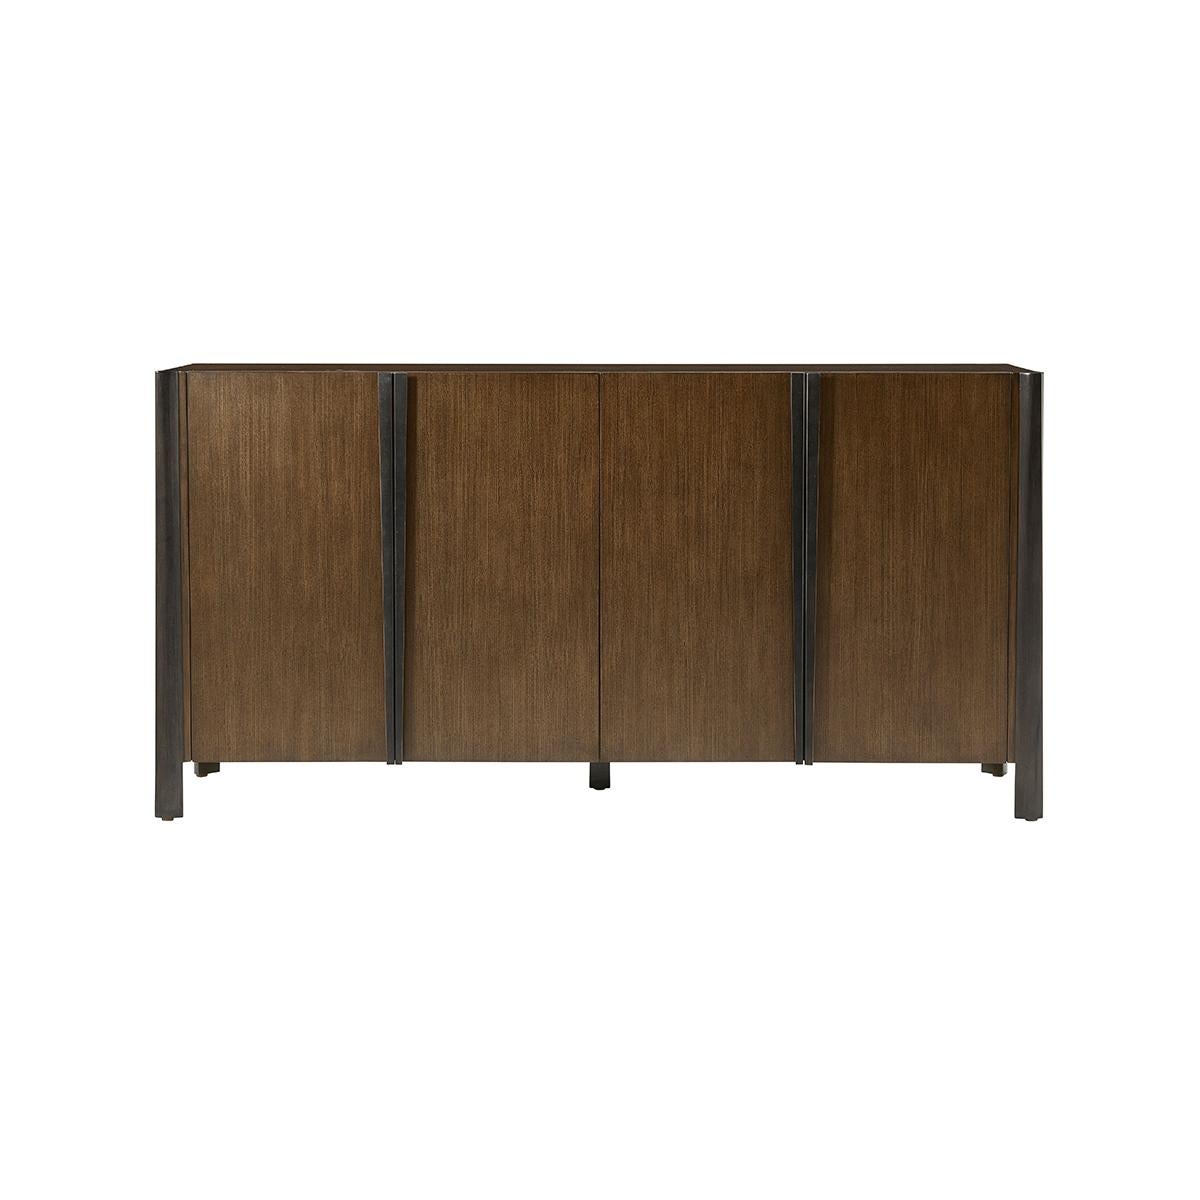  the four-door cabinet's design creates subtle motion, with elegantly tapering lines throughout. Crafted from Ash in our Gelato finish, the tapering Beech legs add contrast in our are complemented by the tapered brass hardware.

Fitted with two